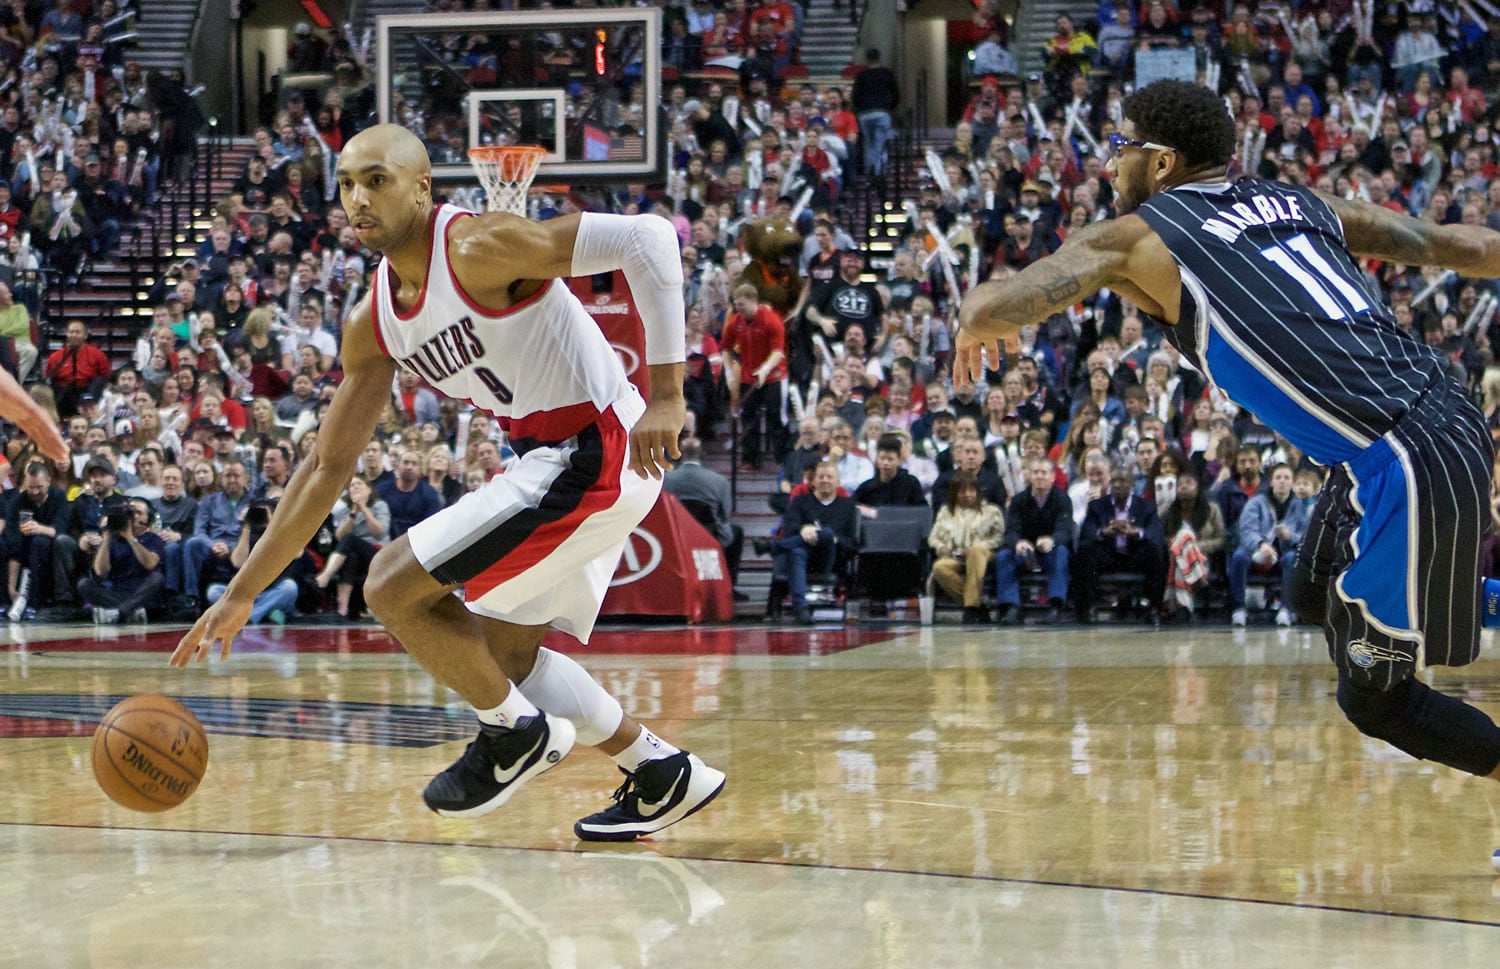 Portland Trail Blazers guard Gerald Henderson, left, dribbles past Orlando Magic forward Devyn Marble, right, during the second half of an NBA basketball game in Portland, Ore., Saturday, March 12, 2016.